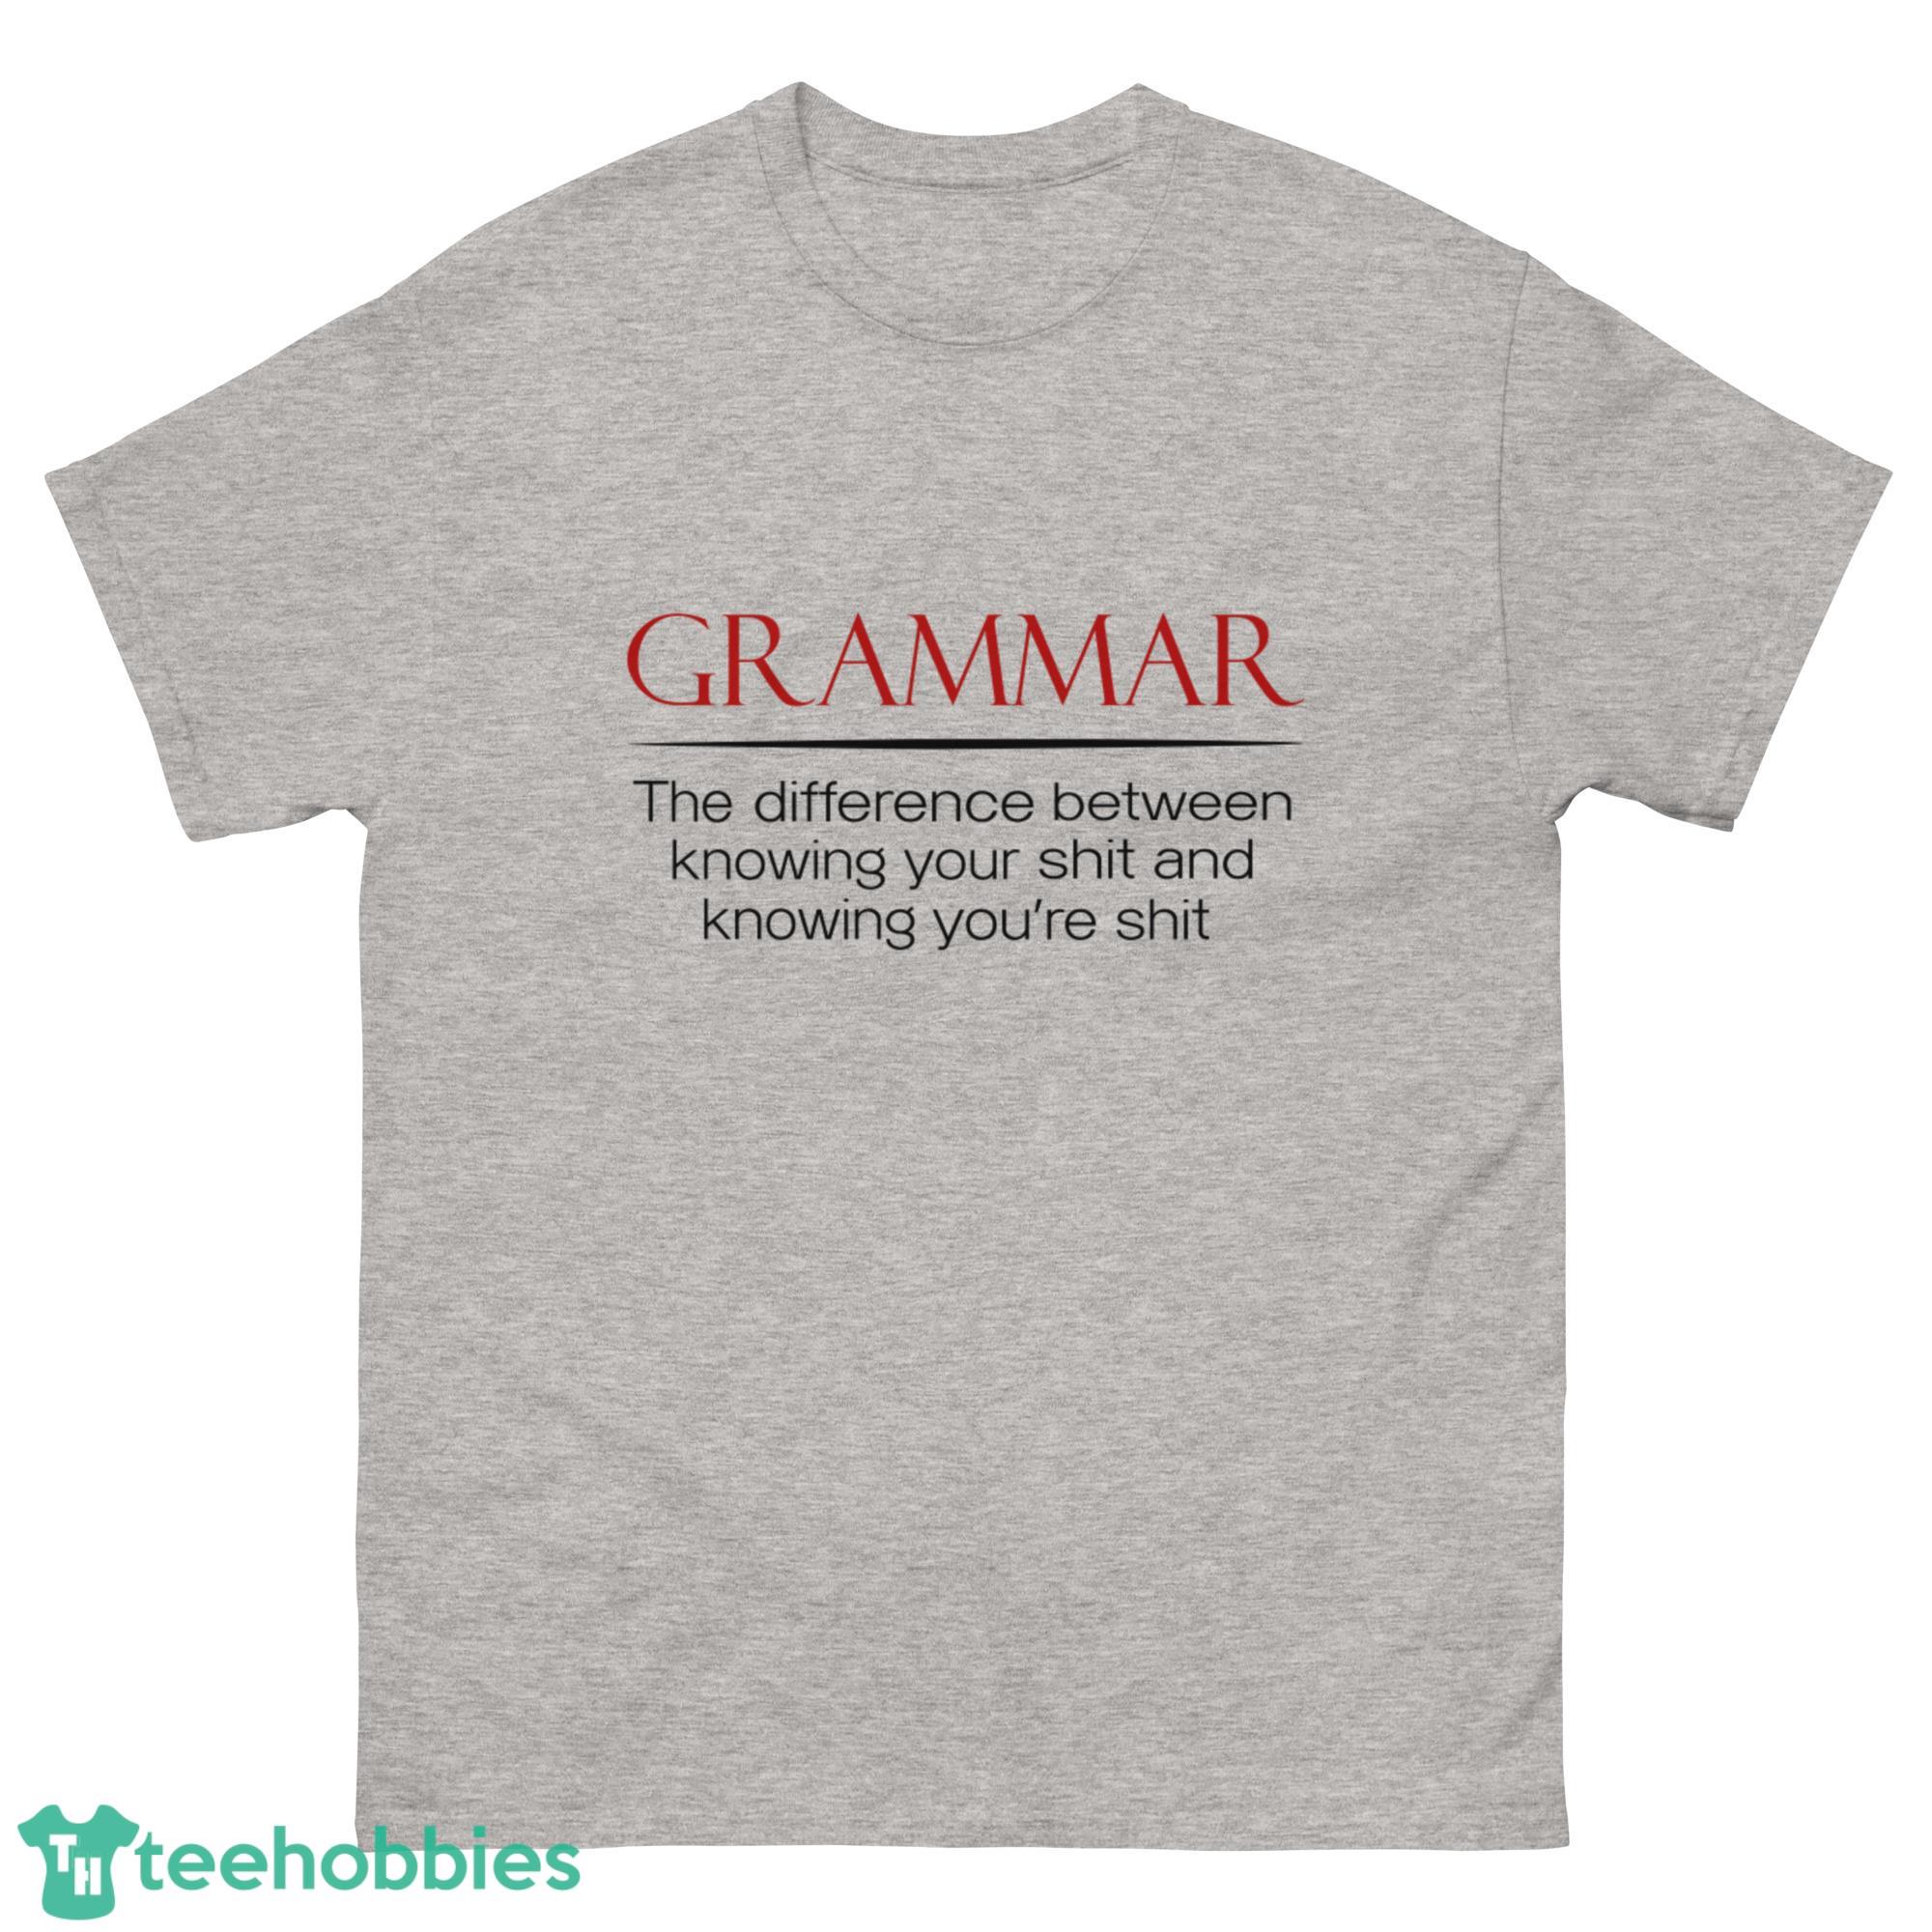 Grammar The Diference Between Knowing Your Shit And Knowing Youre Shit Shirt - G500 Men’s Classic T-Shirt